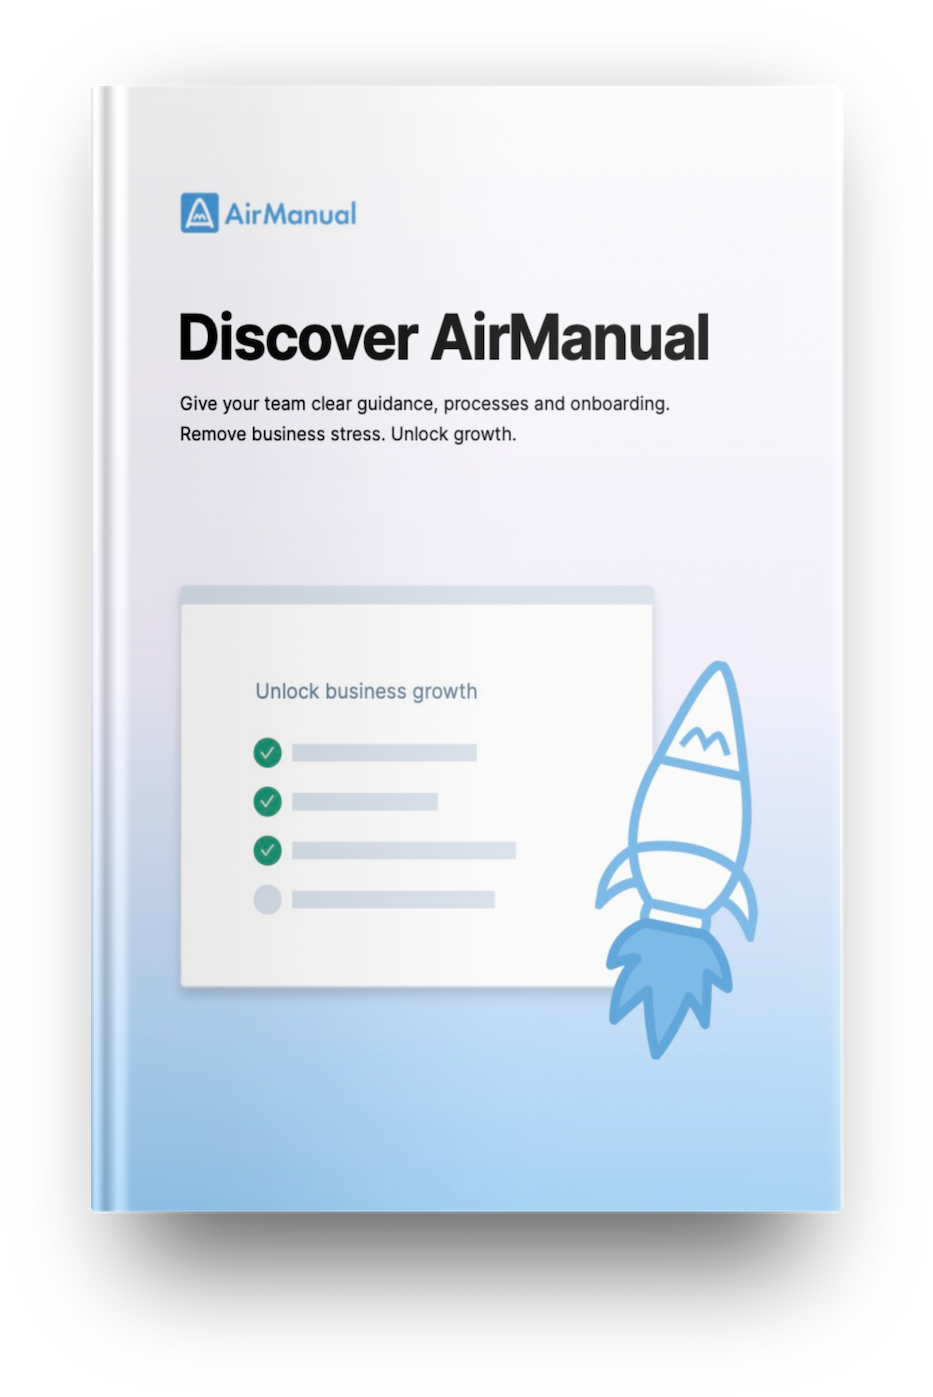 The Discover AirManual guide